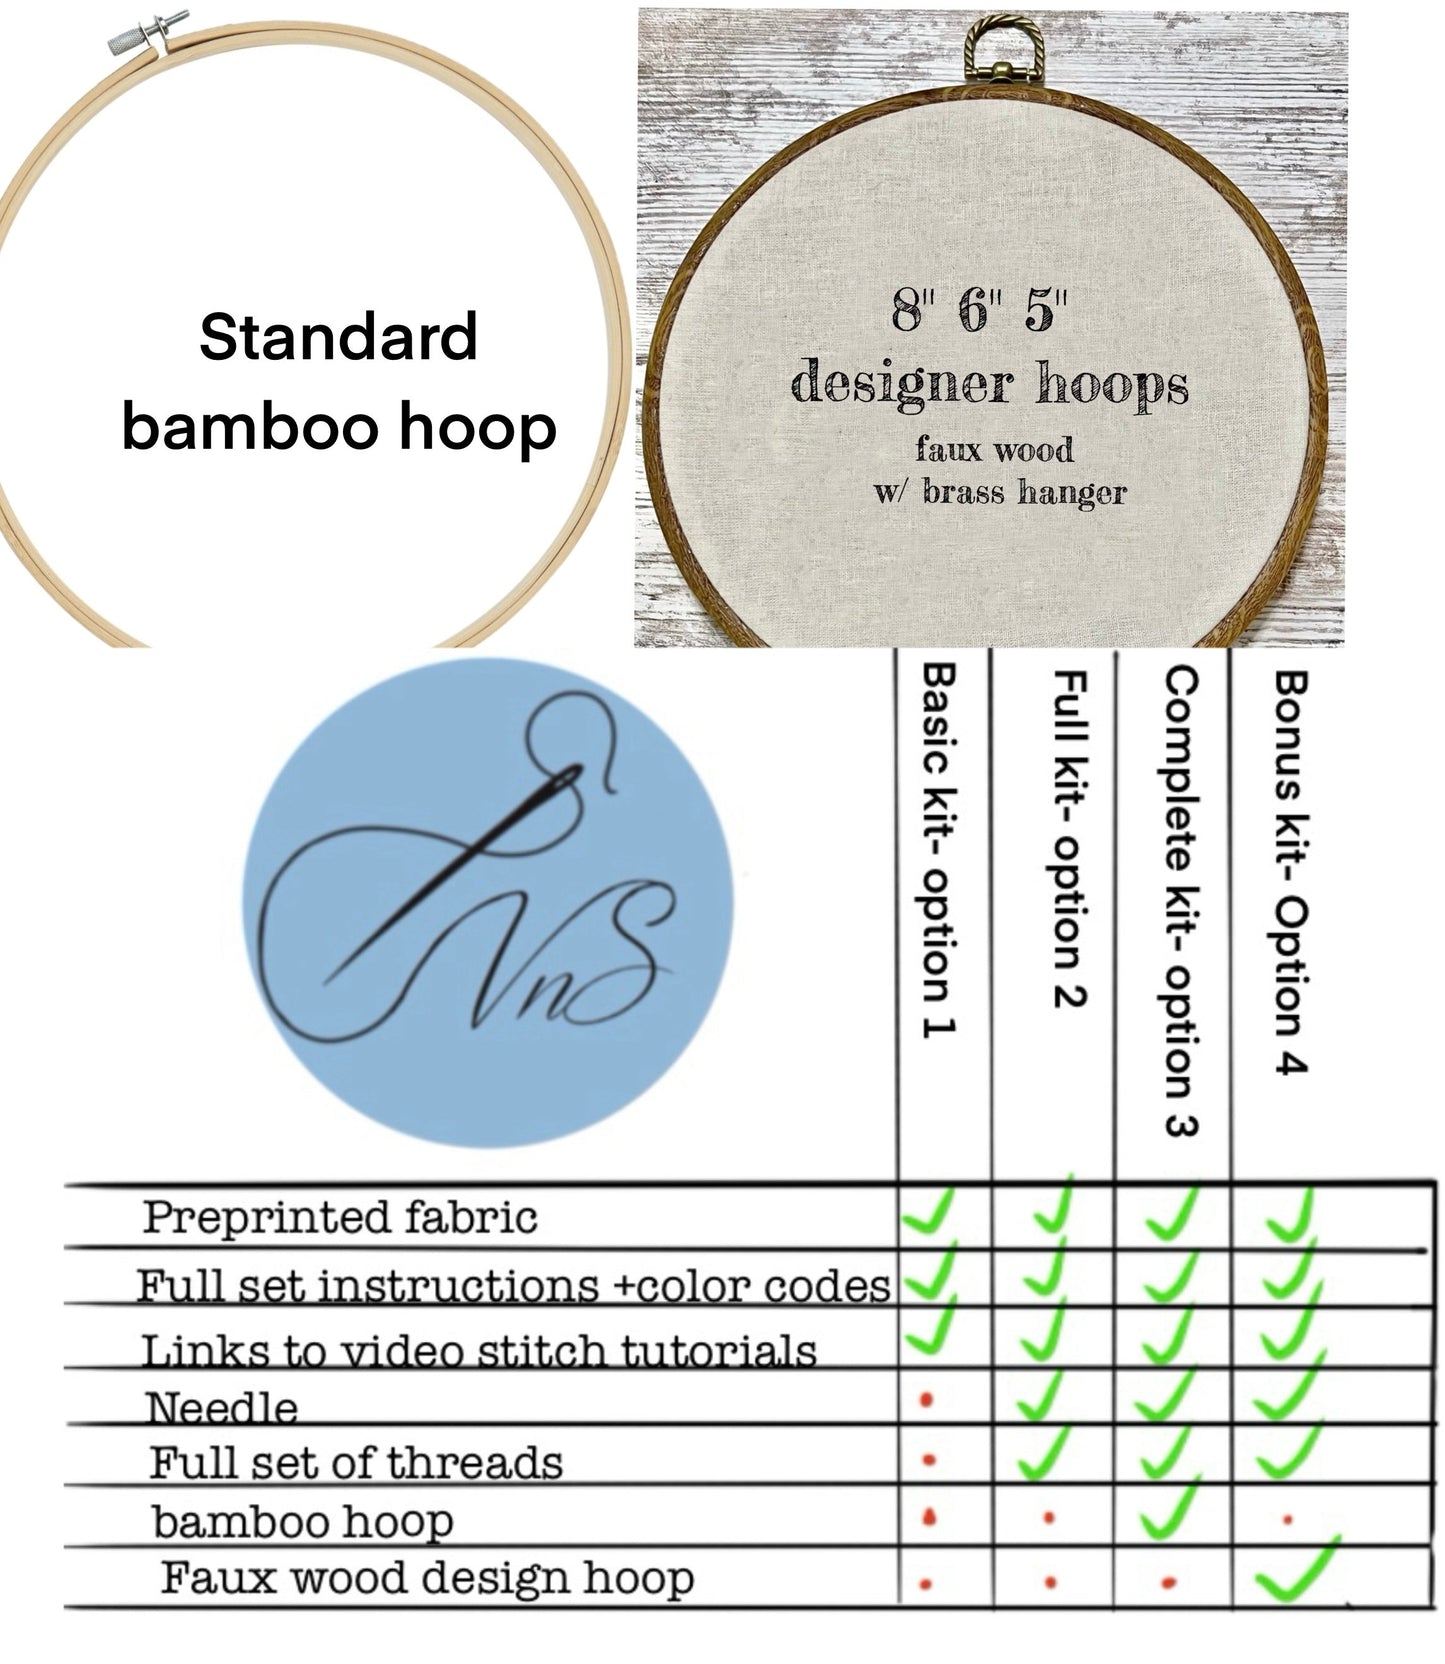 2-Winnie the Pooh Series Hand Embroidery Kit for Beginners-2